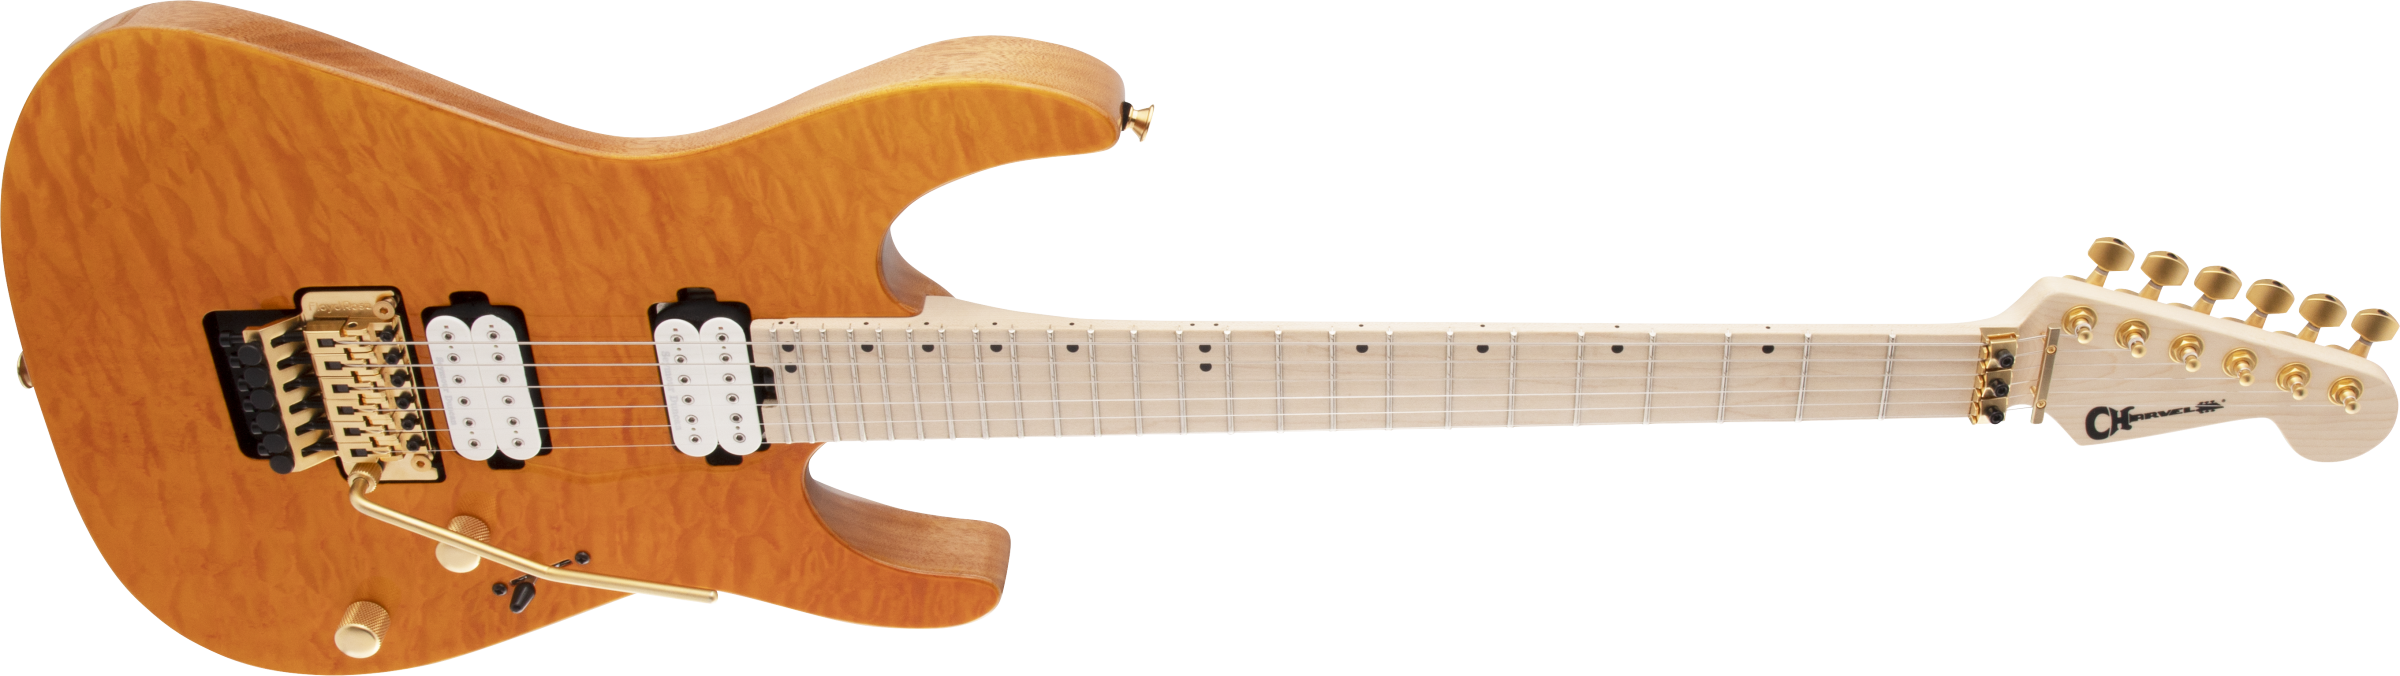 Charvel Pro-Mod DK24 FR Mahogany with Quilt Maple, Maple Fingerboard, Dark Amber